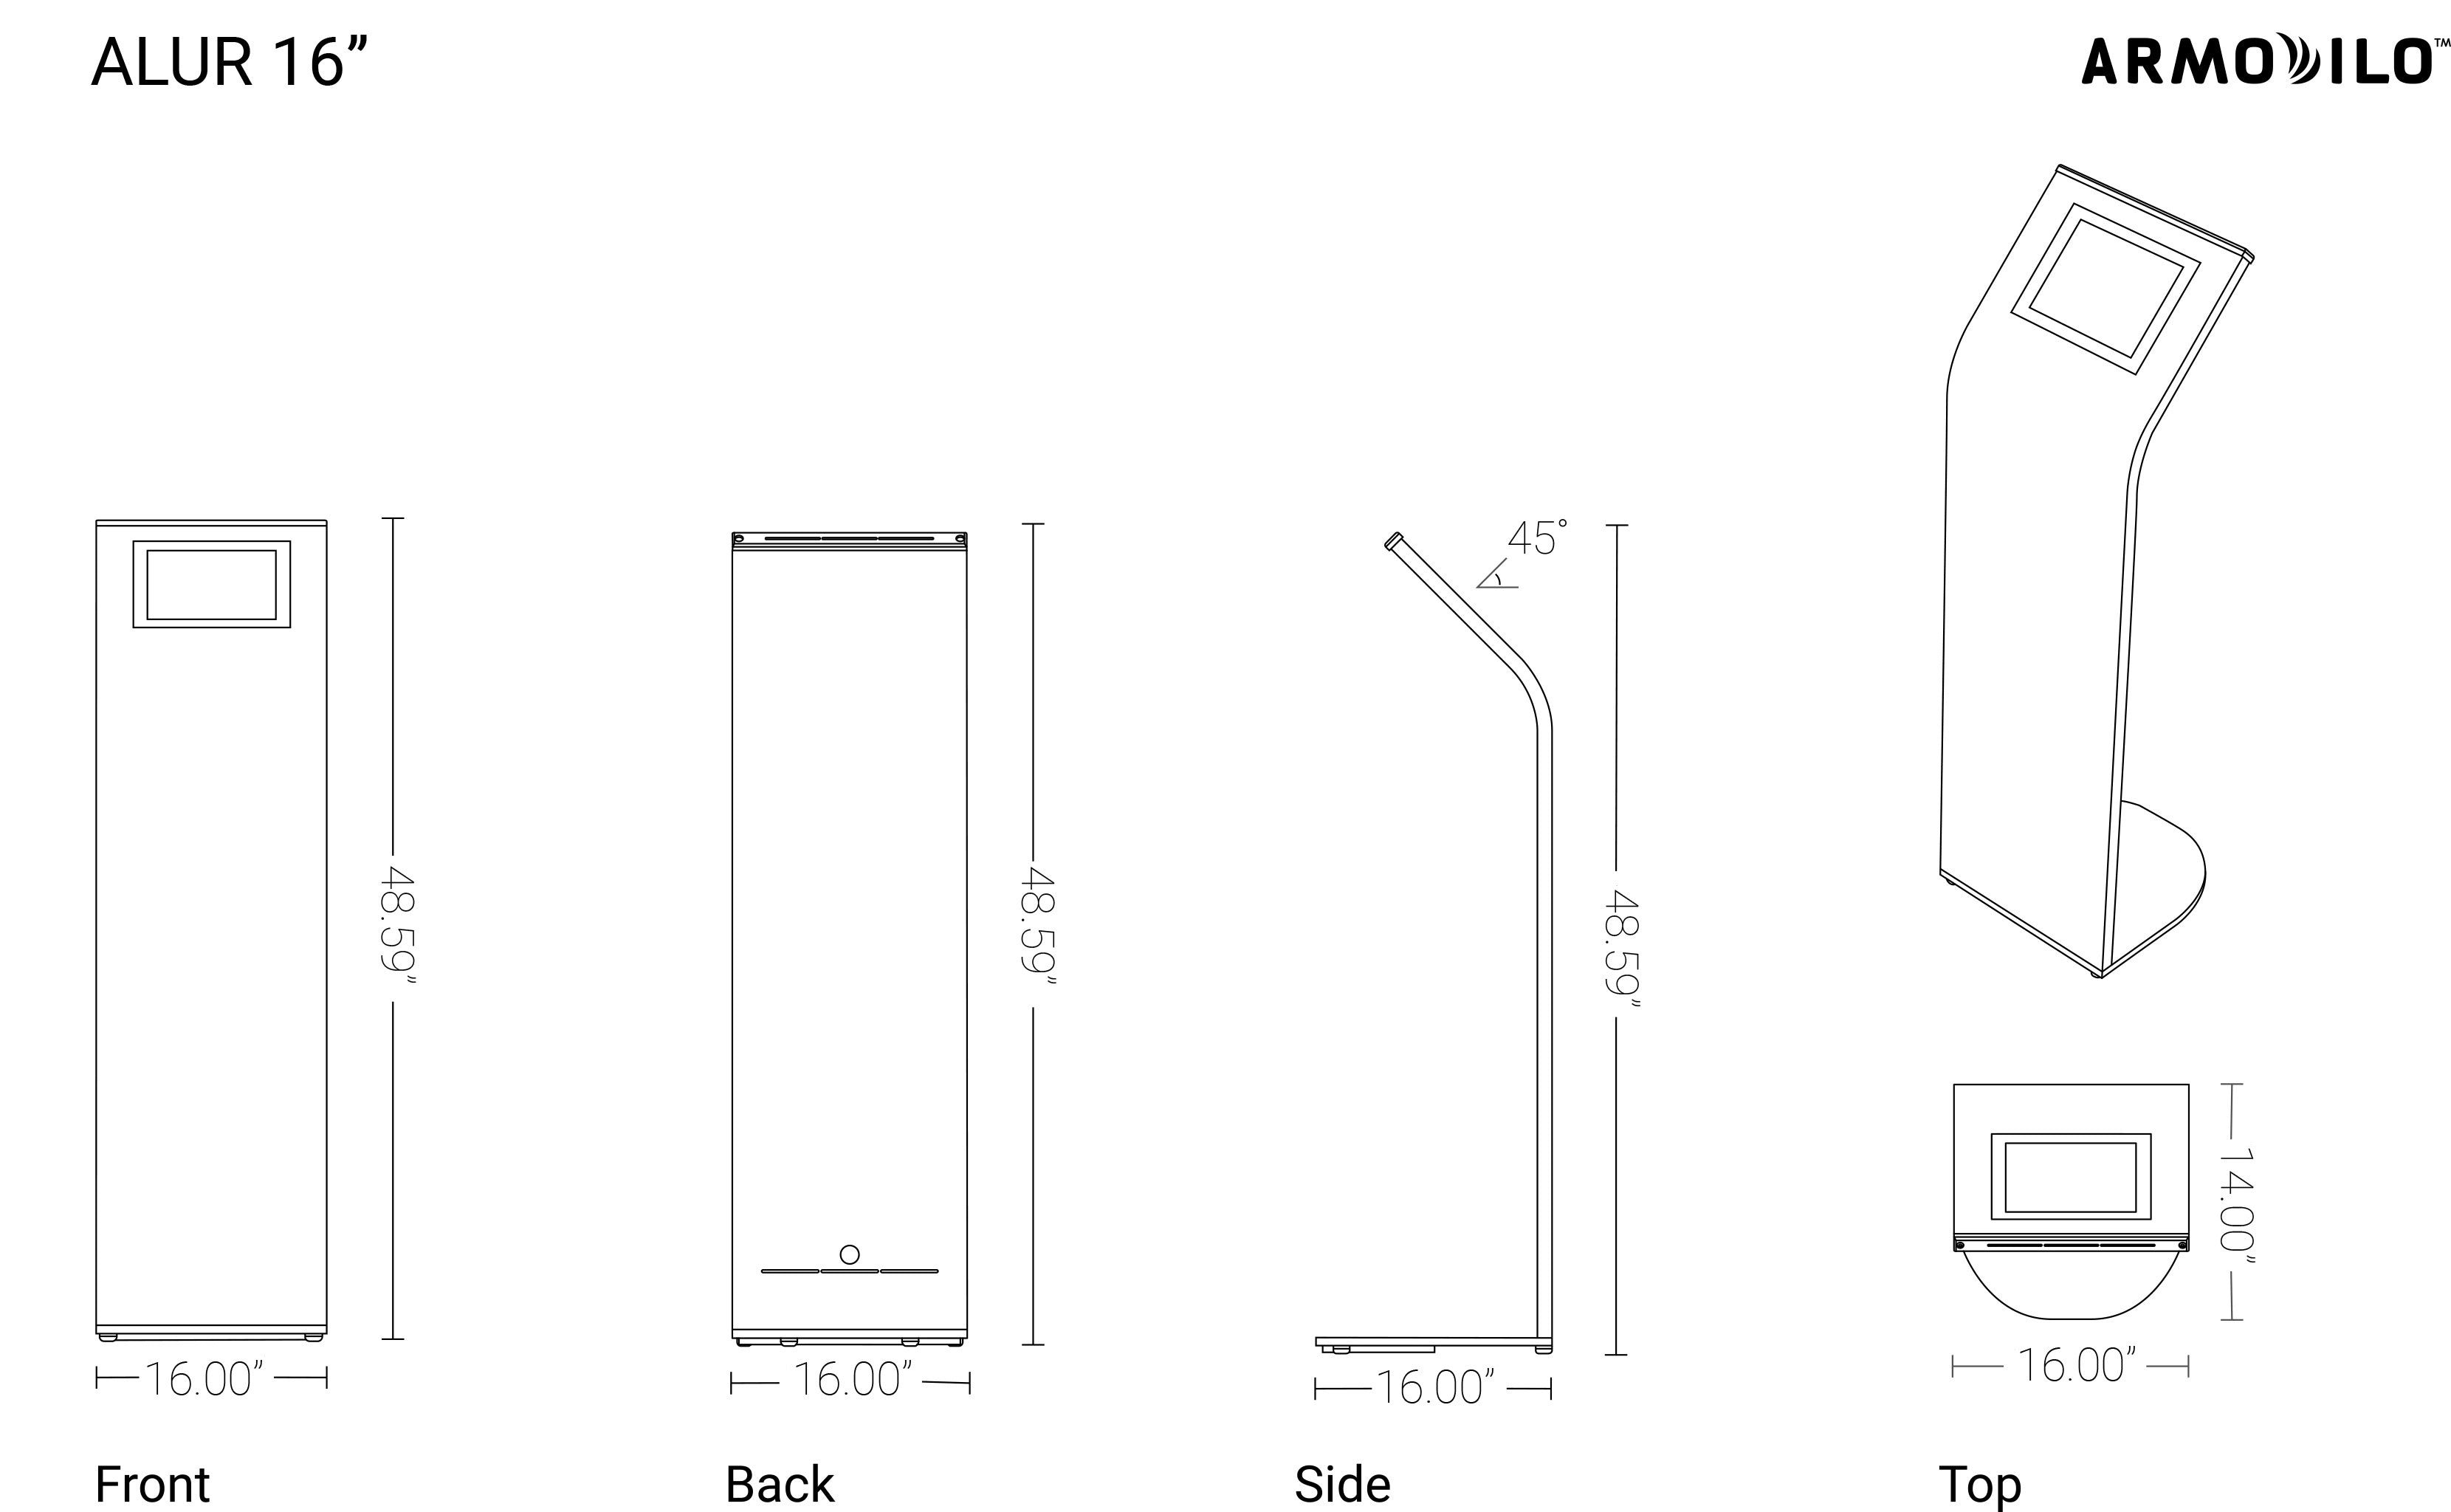 Measurements of the Alur kiosk stand displaying front, back, side, and top in 16"x 48.59".